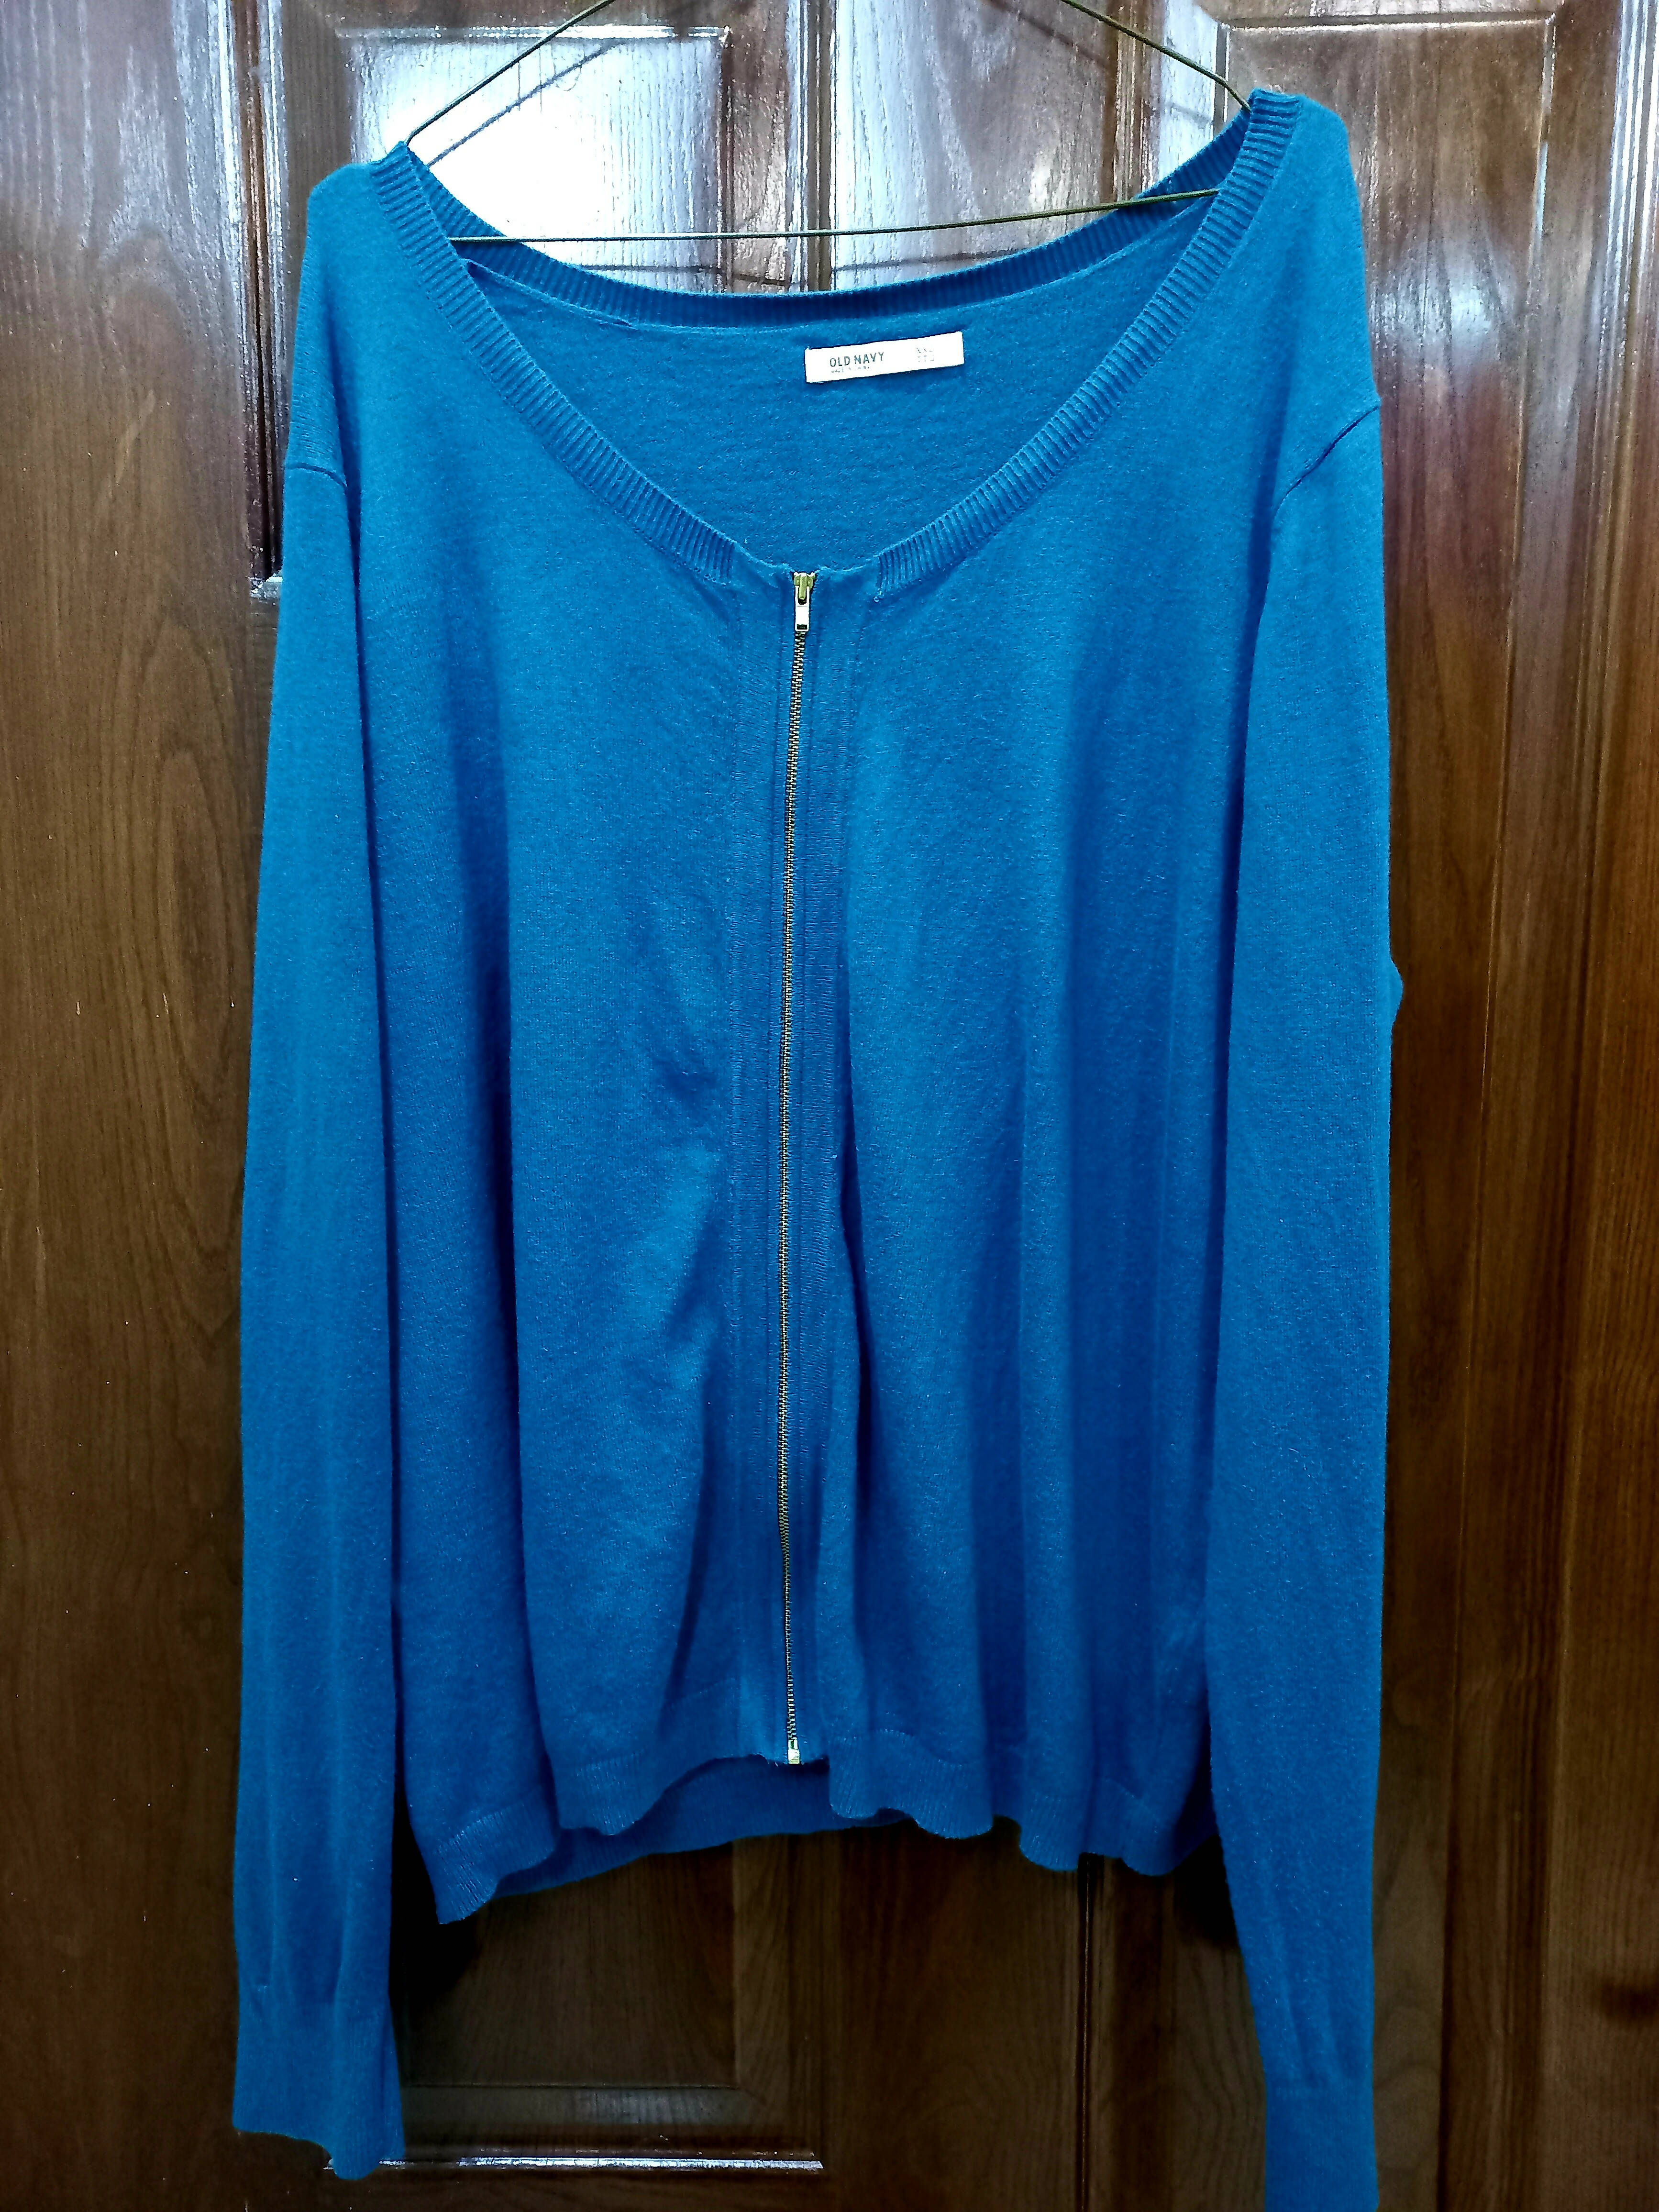 Old Navy | Blue Sweater | Women Sweaters & Jackets | Large | New